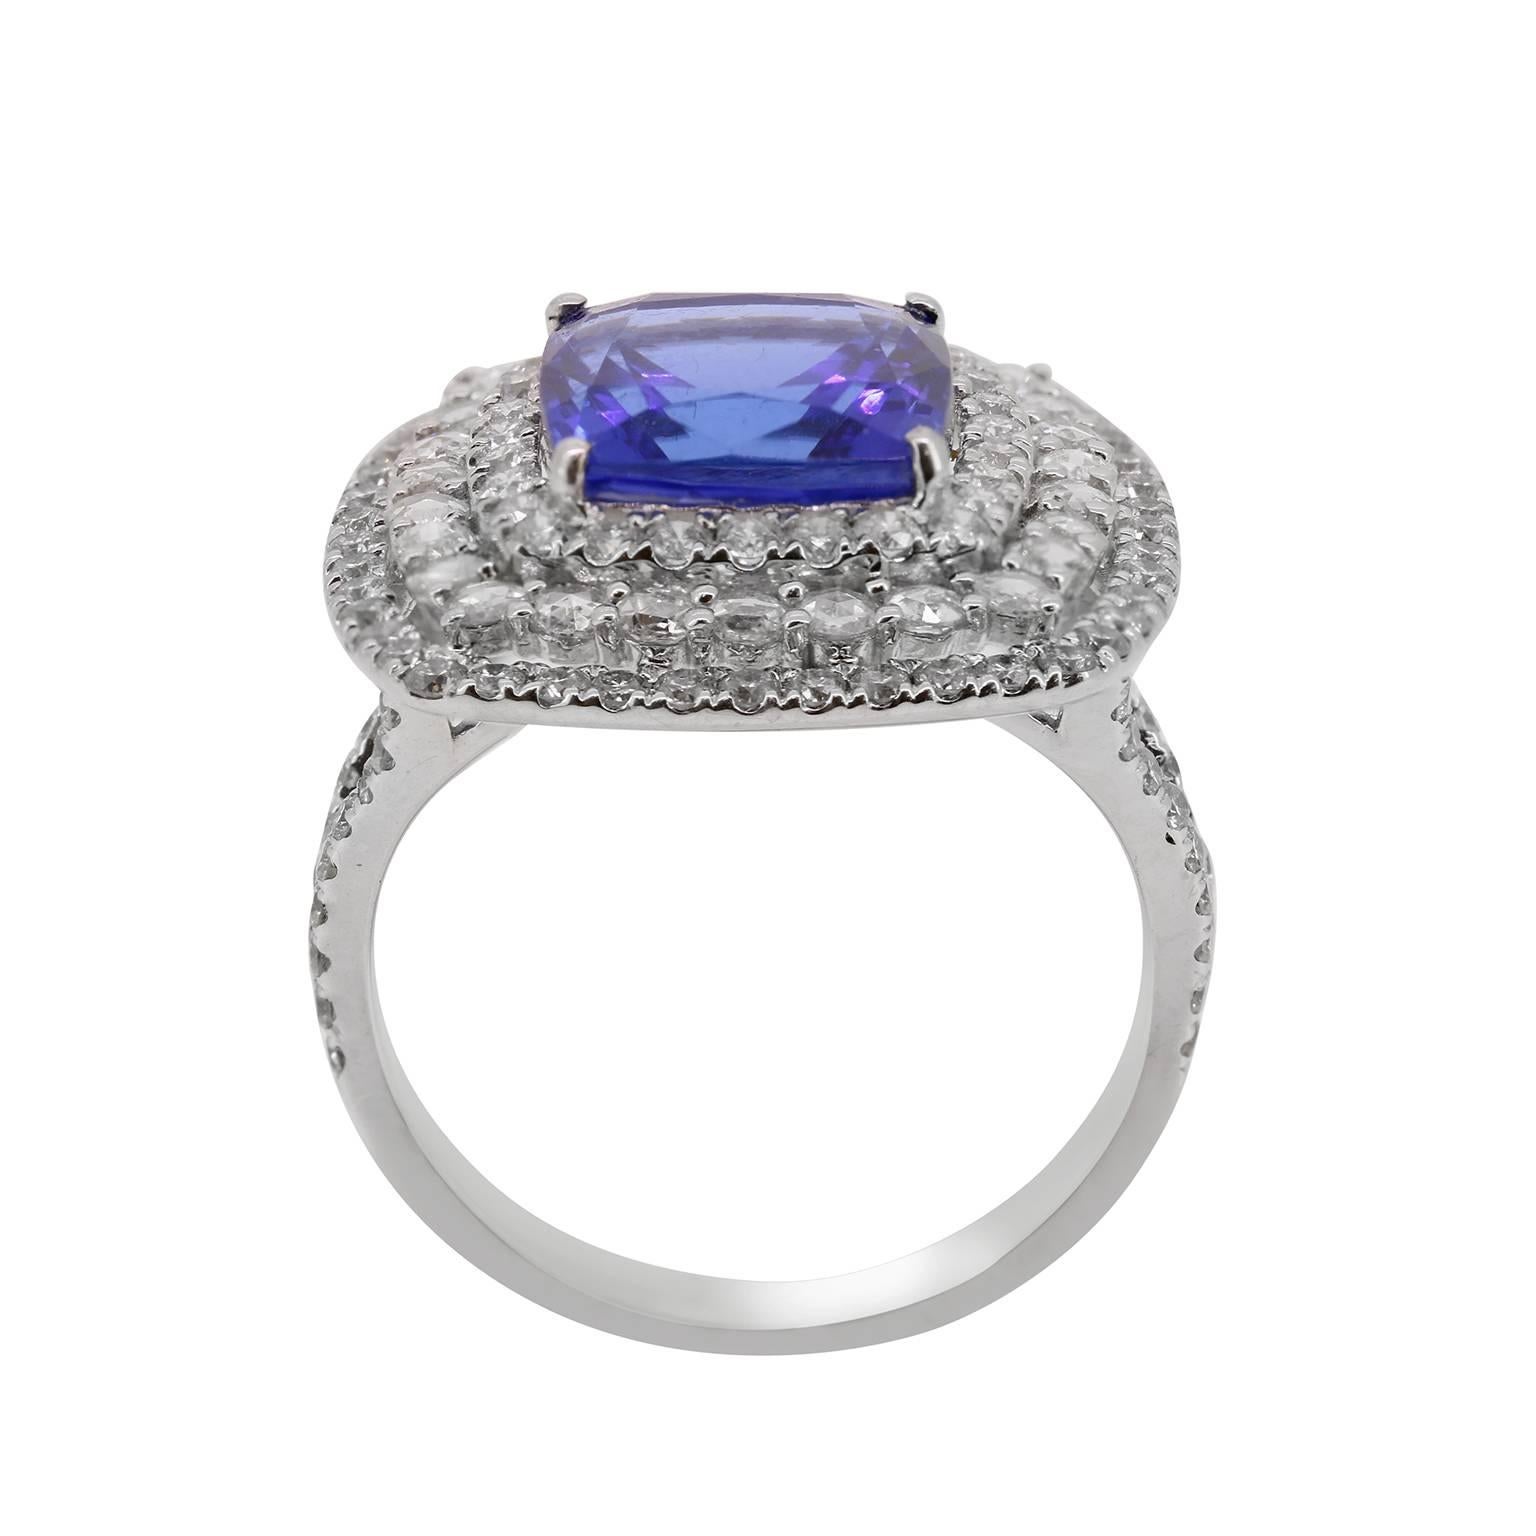 This magnificent 5.15 carat Tanzanite ring is surrounded by 1.78 carats of full cut and rose cut diamonds. This regal ring will be the bell of the ball! 

Size 7, please contact us if sizing is necessary.
20mm X 20mm
